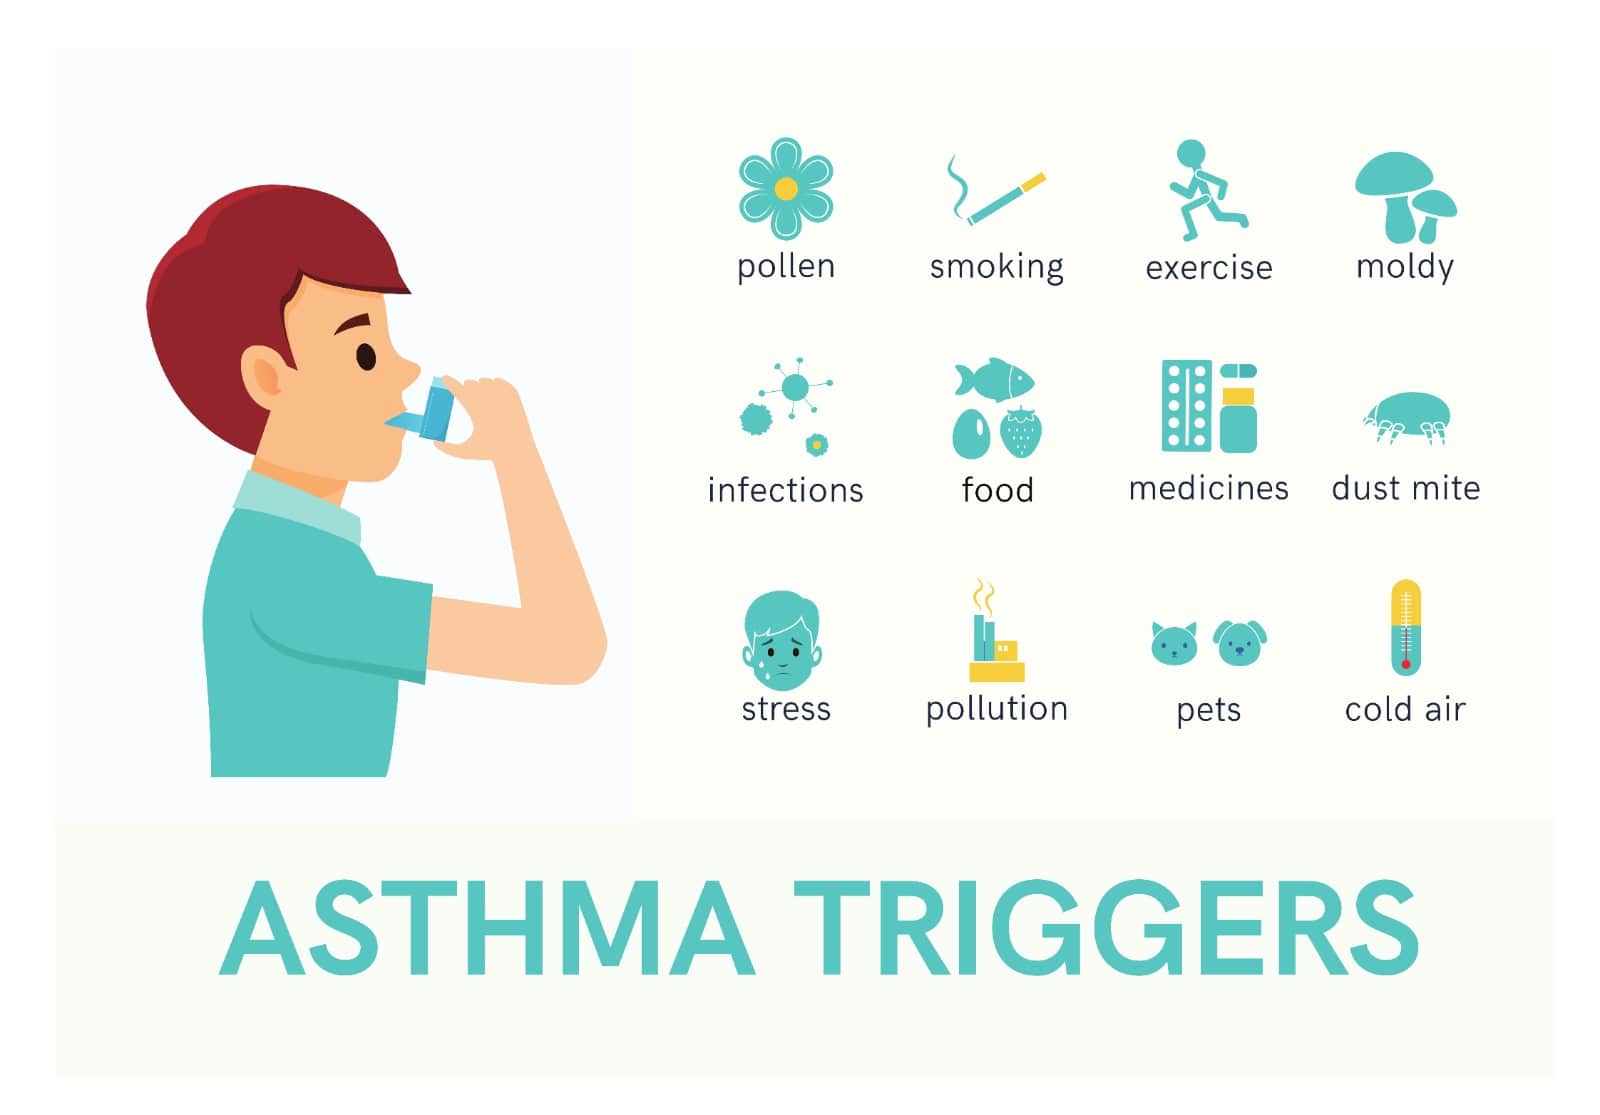 Understand how environmental changes can alleviate asthma triggers